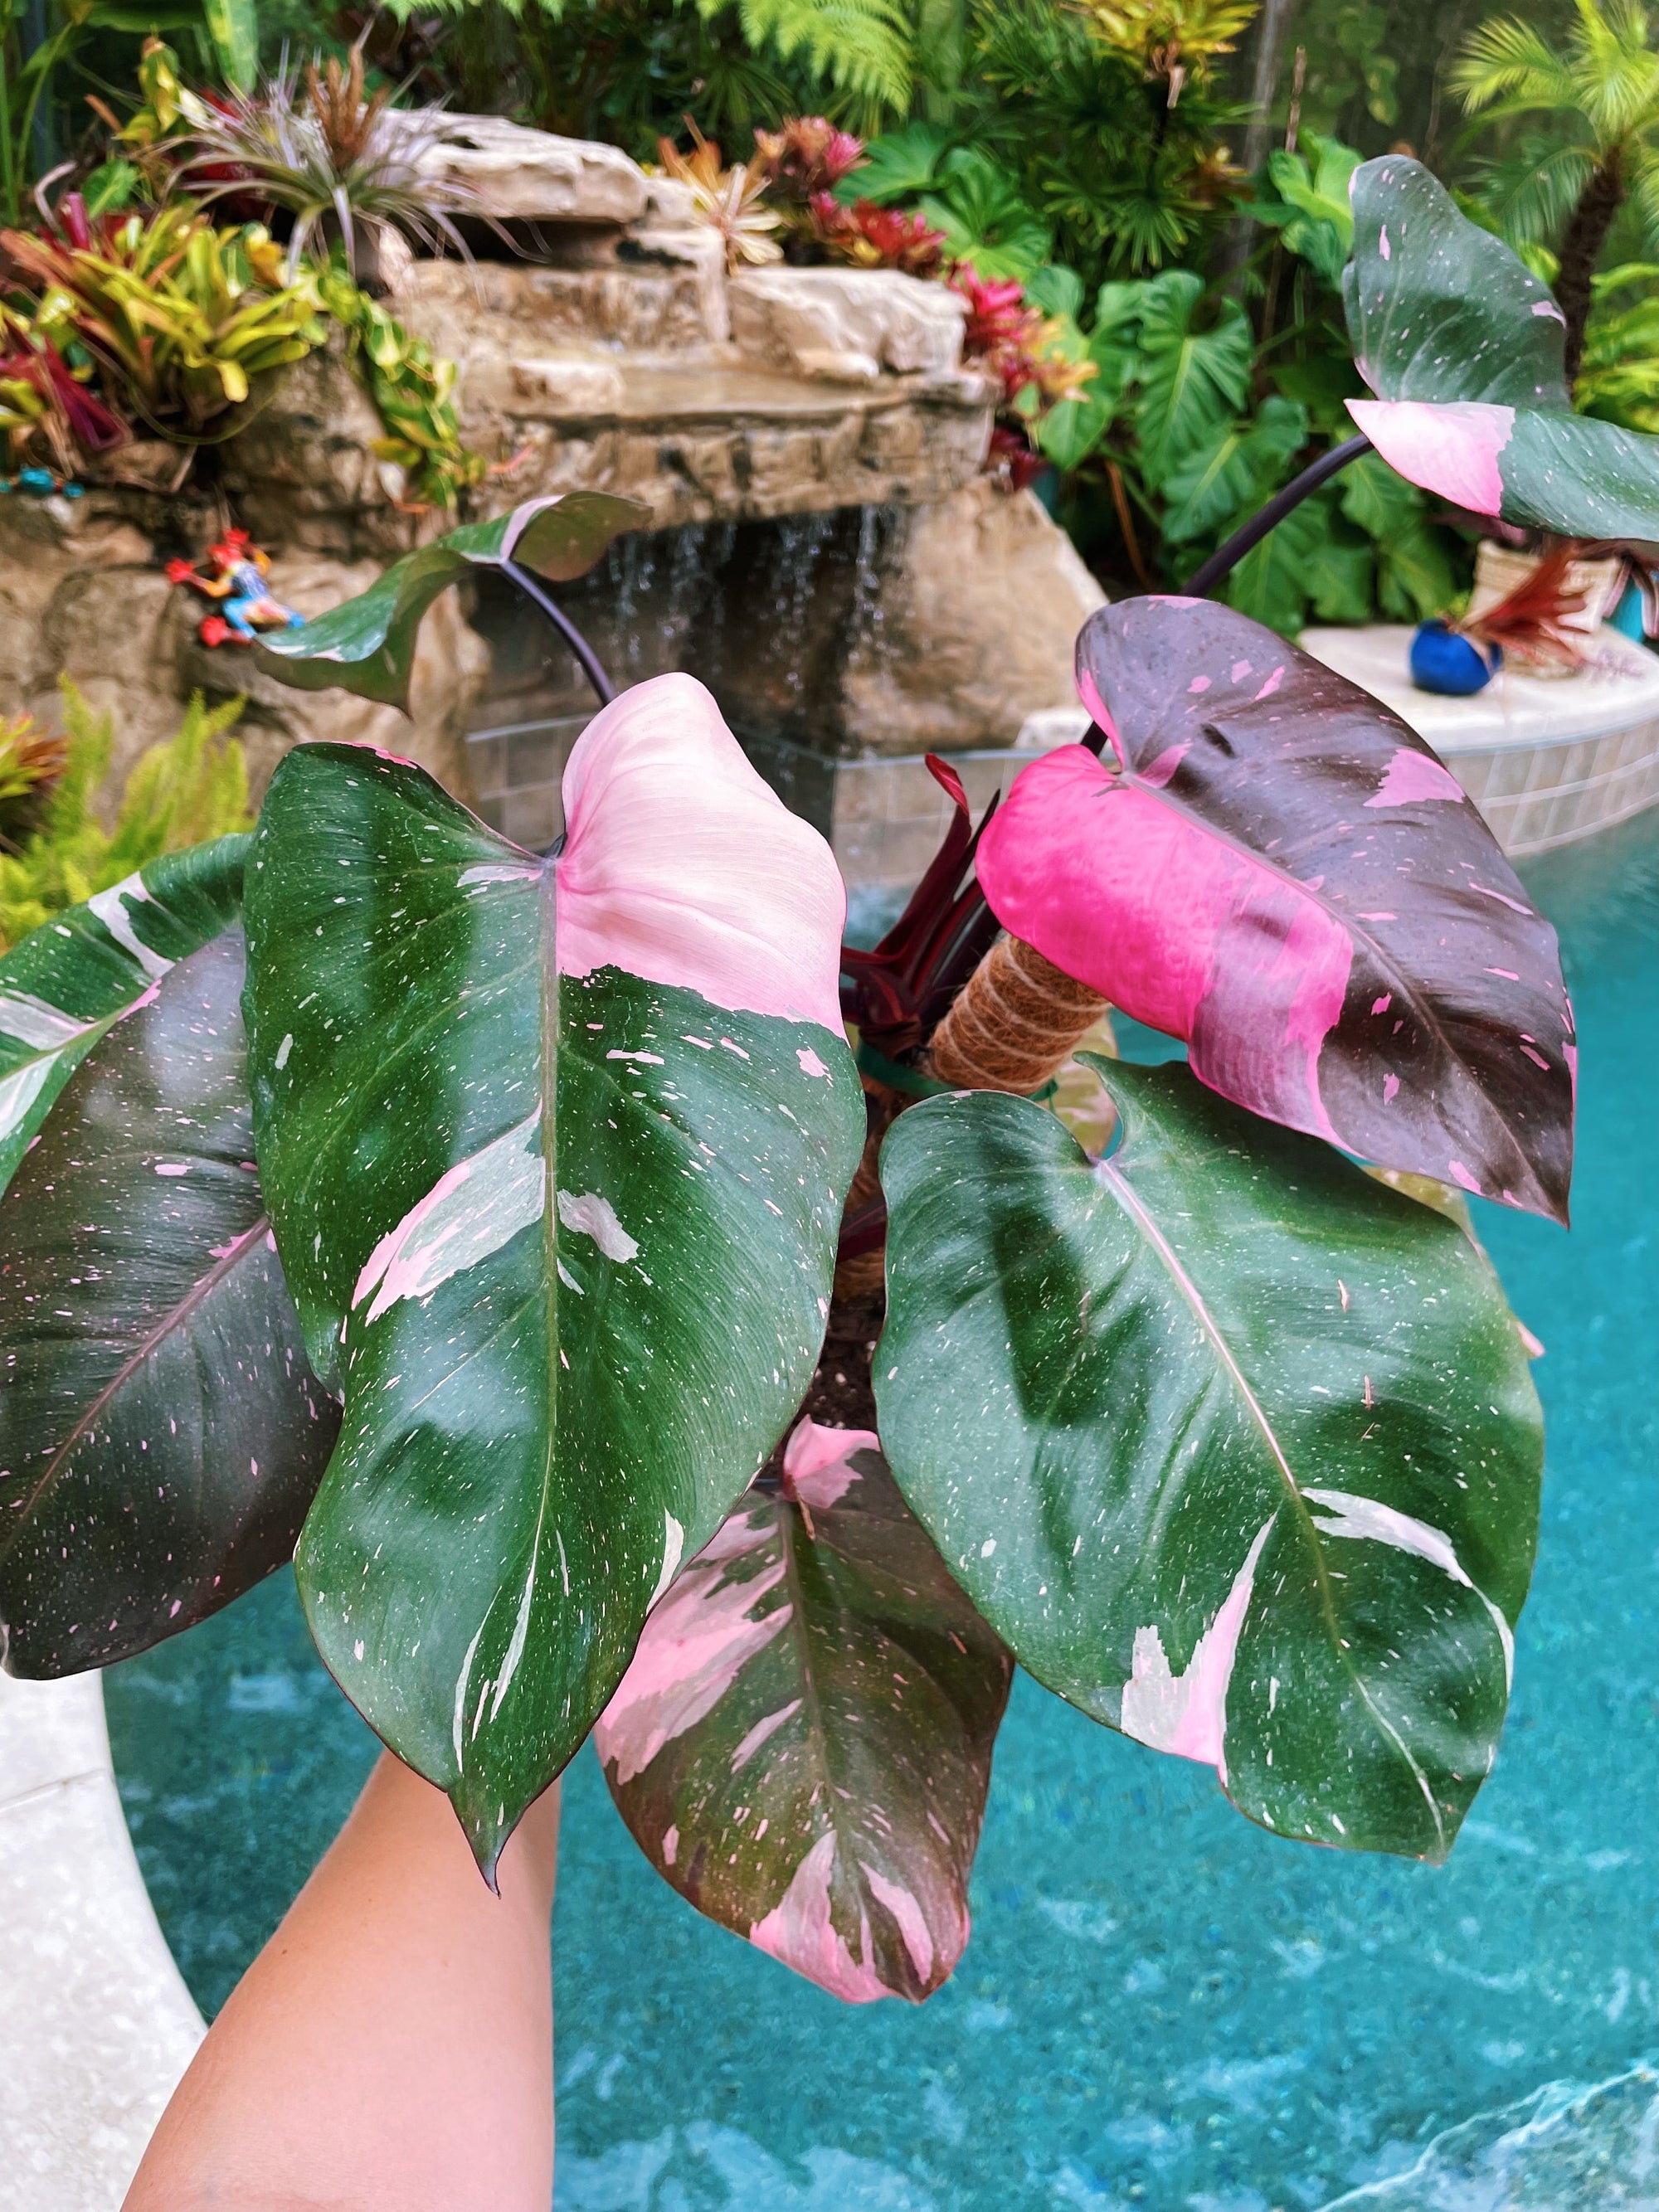 Actual Plant! Jumbo Mature Highly Variegated Black Cherry Philodendron Pink Marble Princess Tricolor Galaxy Sport plant 6 pot gift aroid